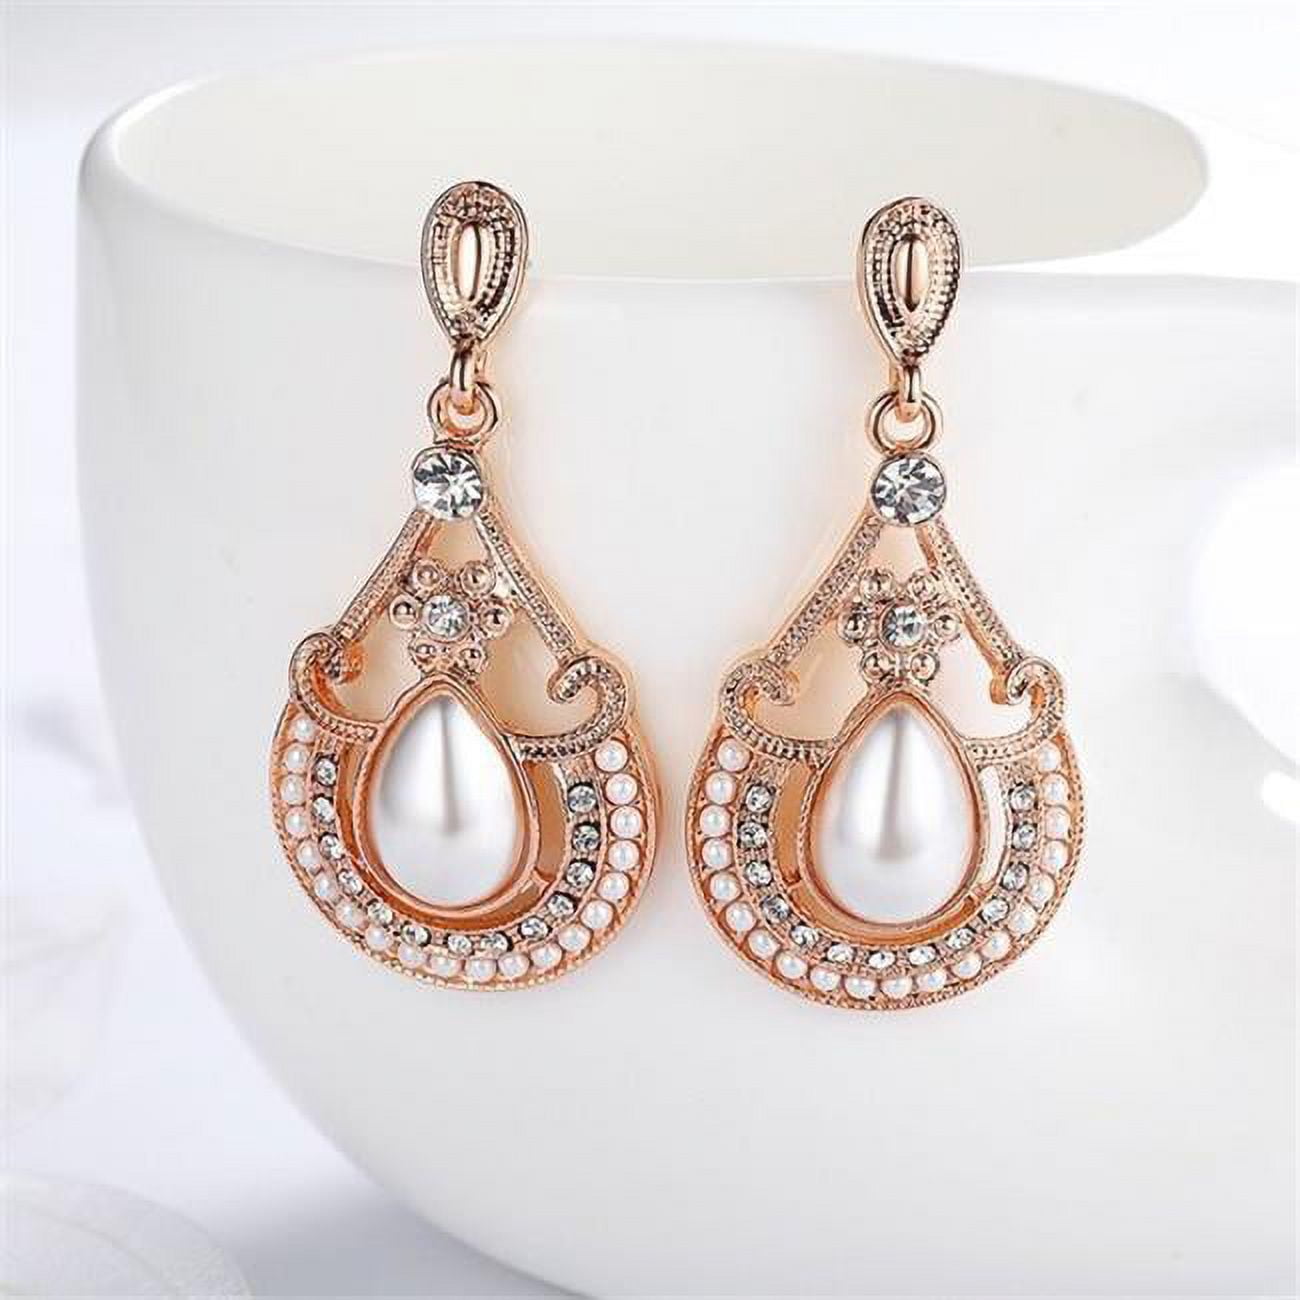 Picture of Amabel Designs E-VNS057 Rose Gold Statement Earrings